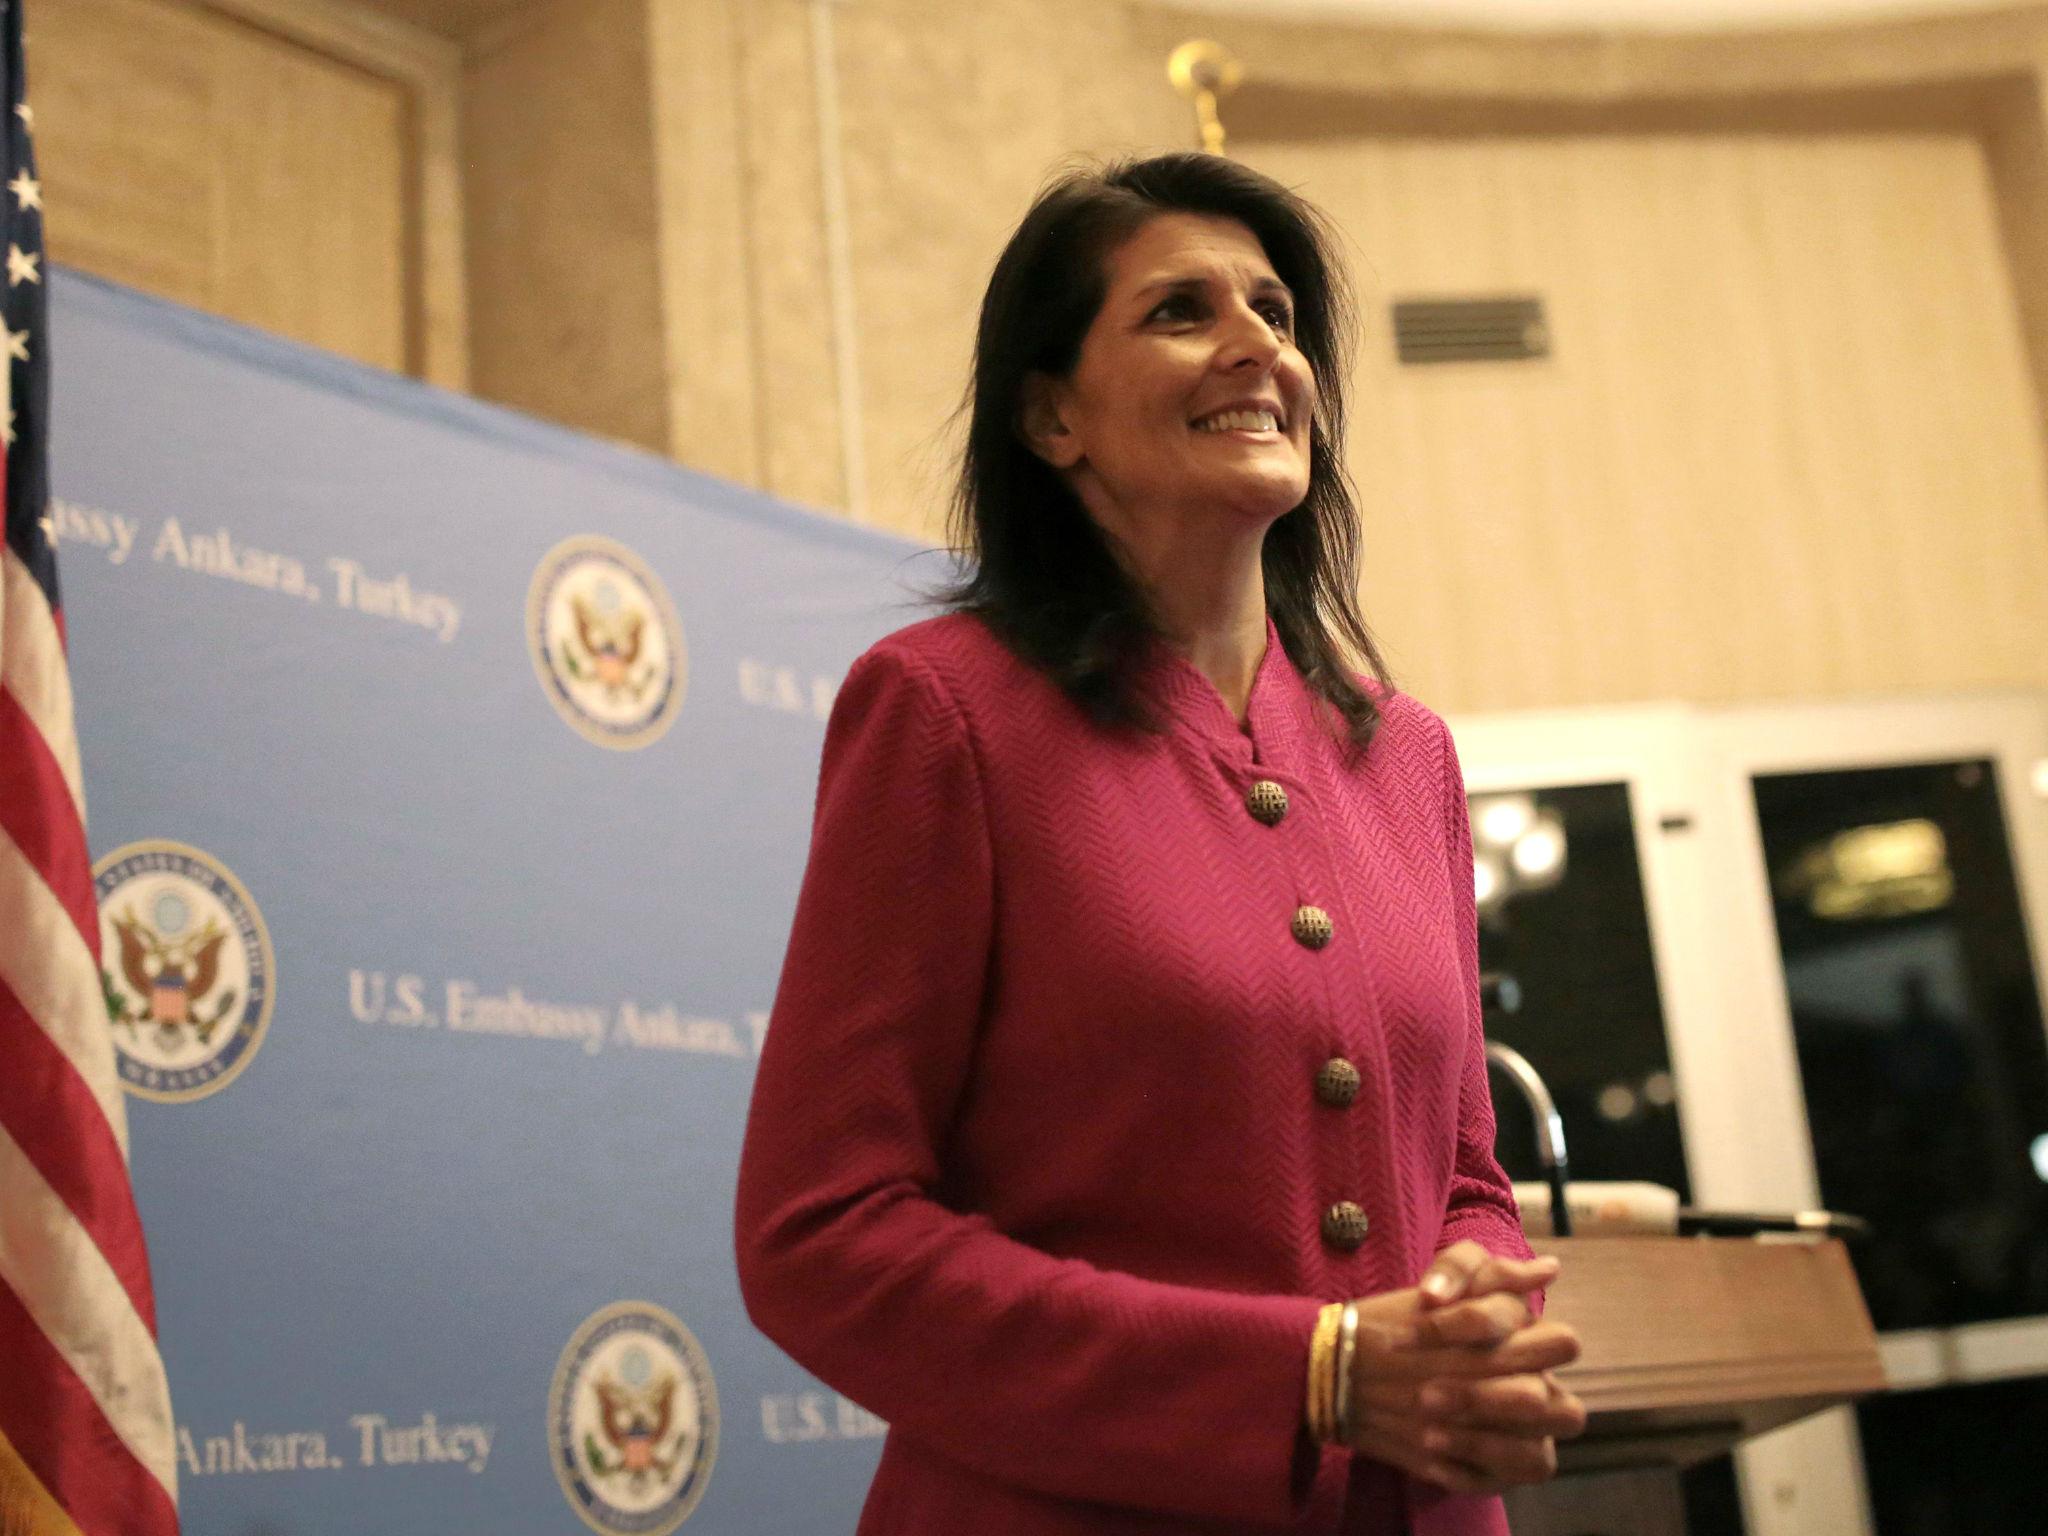 US Ambassador to the UN Nikki Haley said that she would not have set up a backchannel to communicate with the Kremlin through their embassy in Washington, DC as senior White House aide Jared Kushner is accused of doing